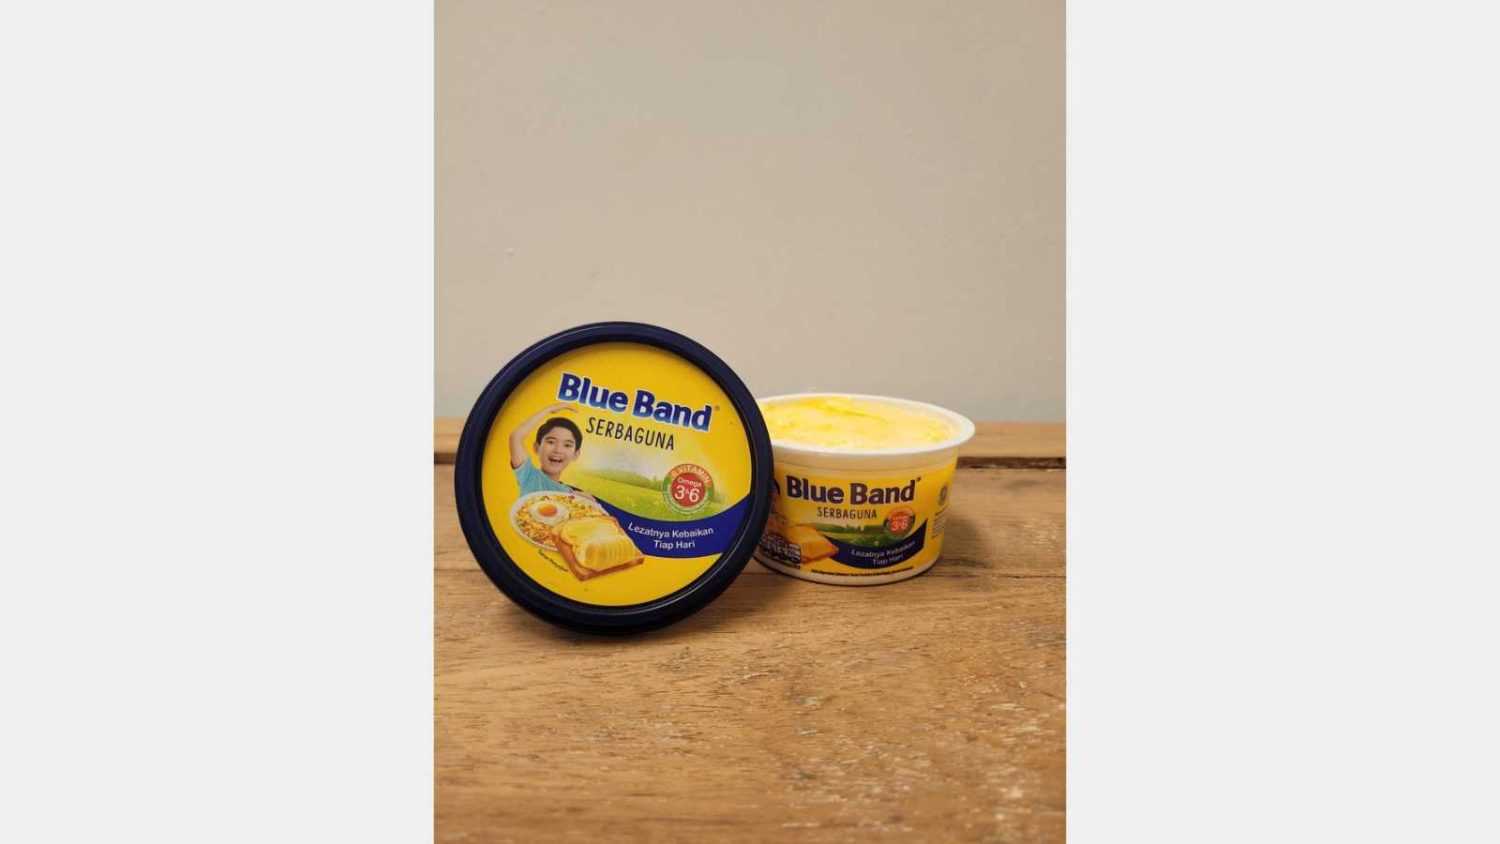 Blue Band margarine is made from vegetable oils and is used as a substitute for butter. It comes in various forms, including block margarine and spreadable margarine